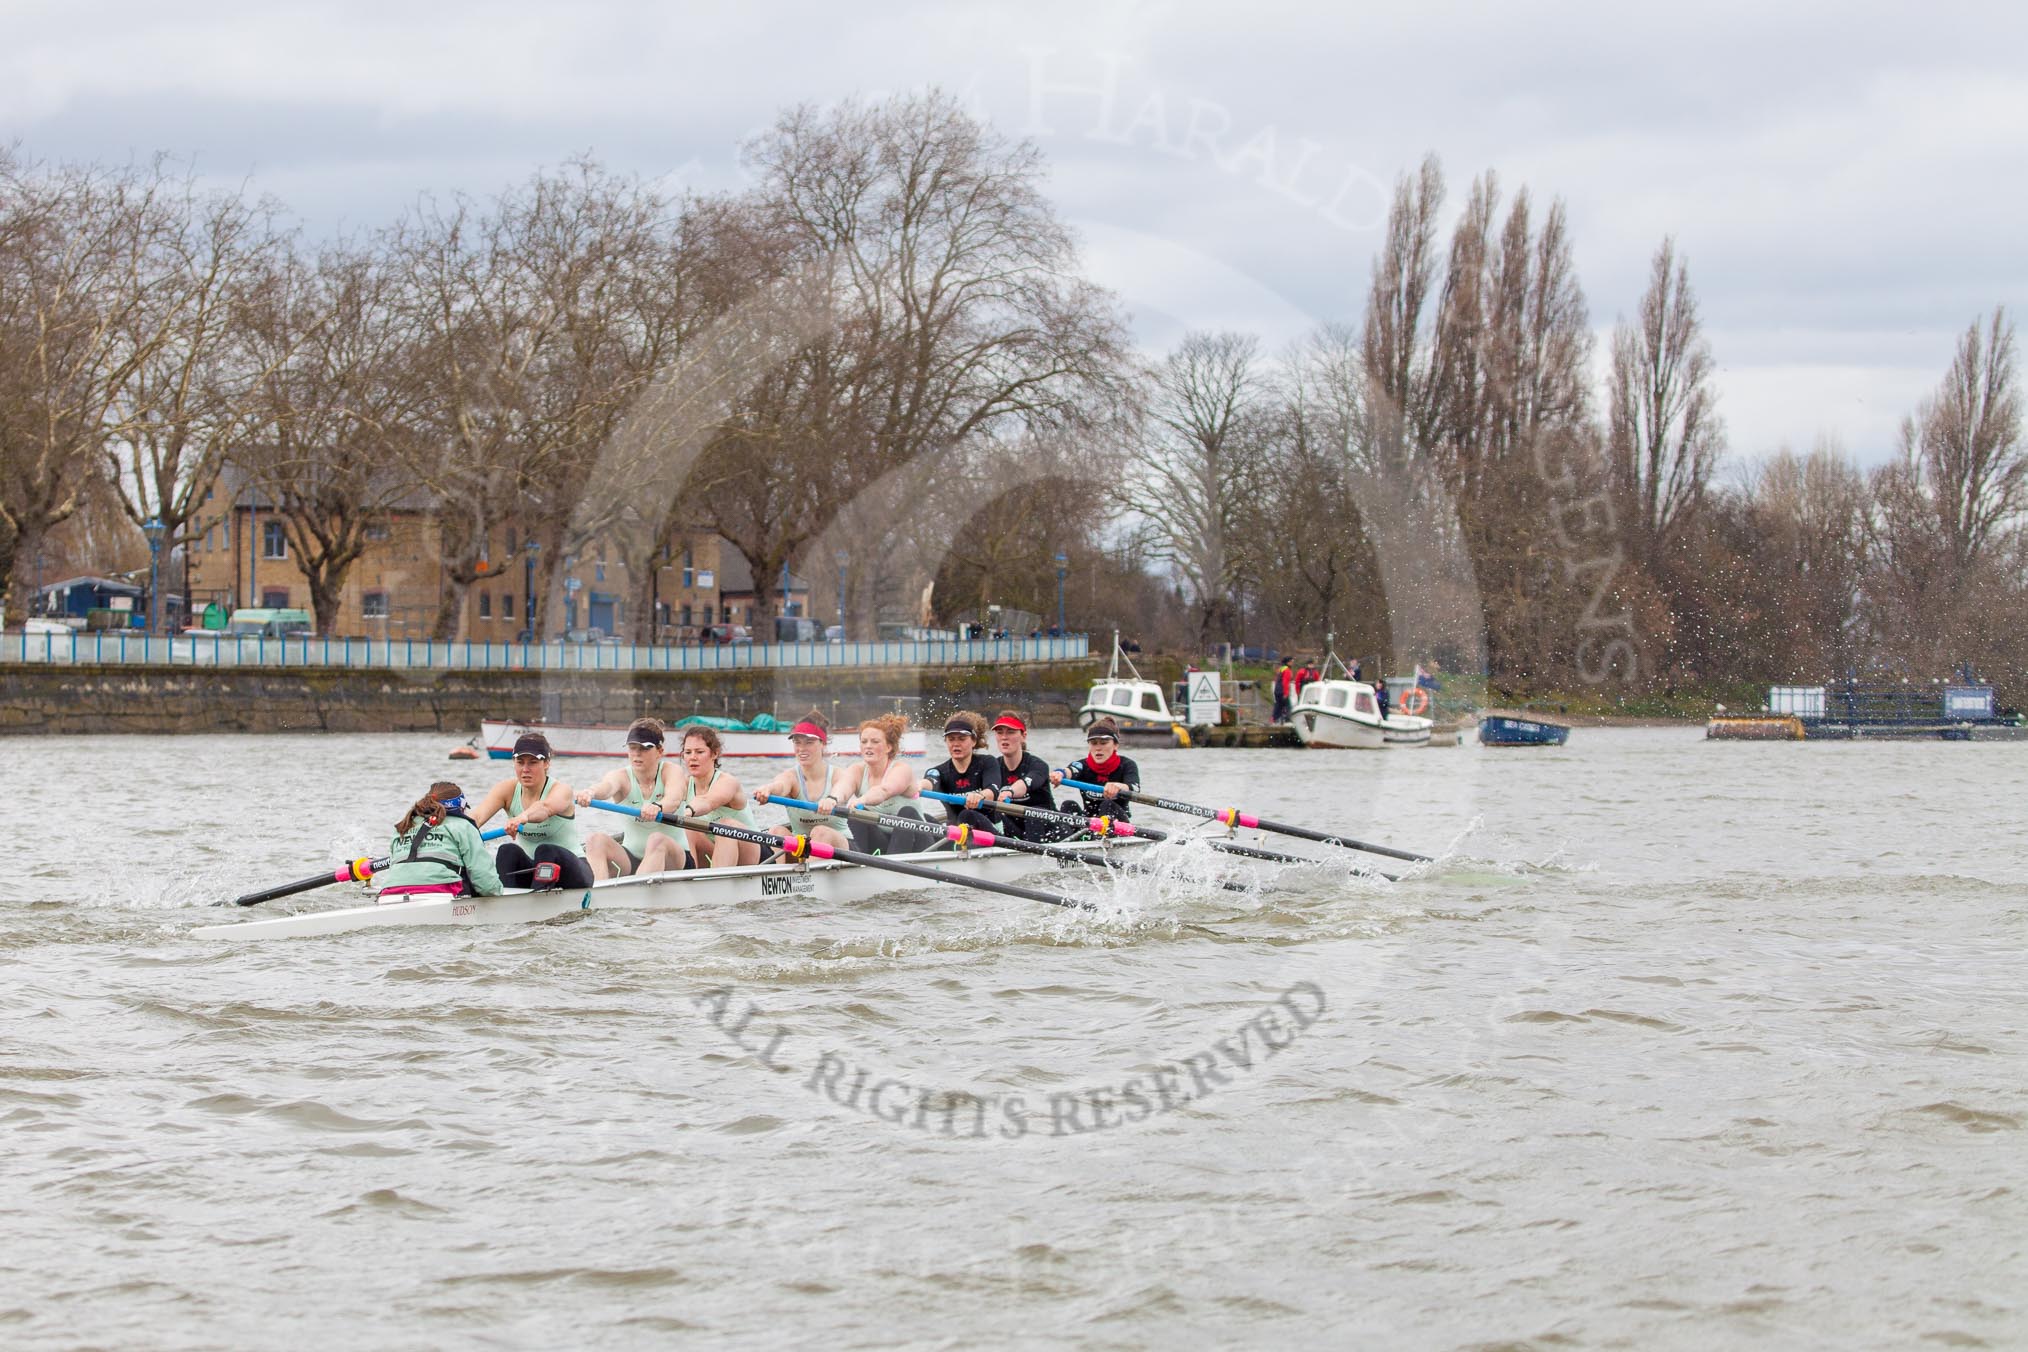 The Boat Race season 2014 - fixture CUWBC vs Thames RC: The leading Cambridge boat just having passed the Putney boat houses..




on 02 March 2014 at 13:11, image #55